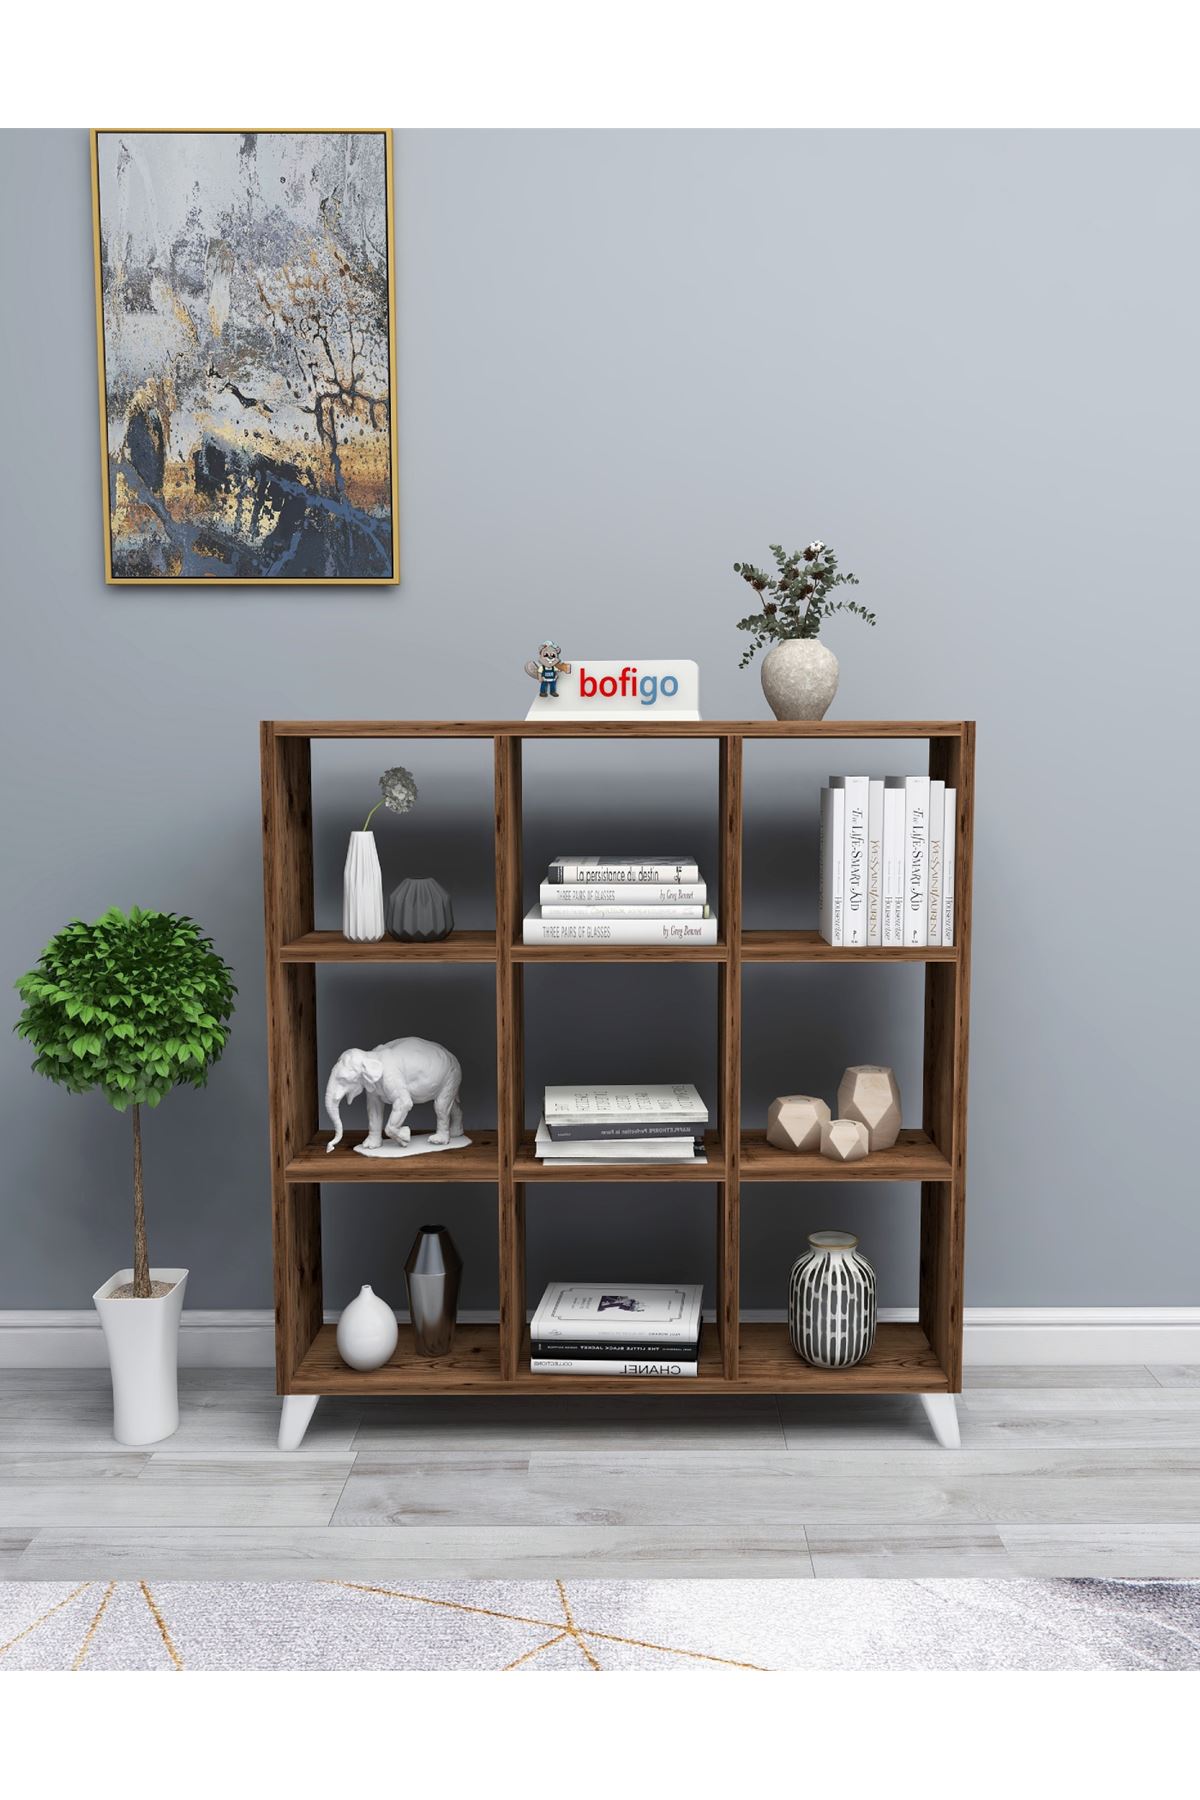 Bofigo Cube Bookshelf with 9 Sections and Shelves Square Bookcase Library Lidya